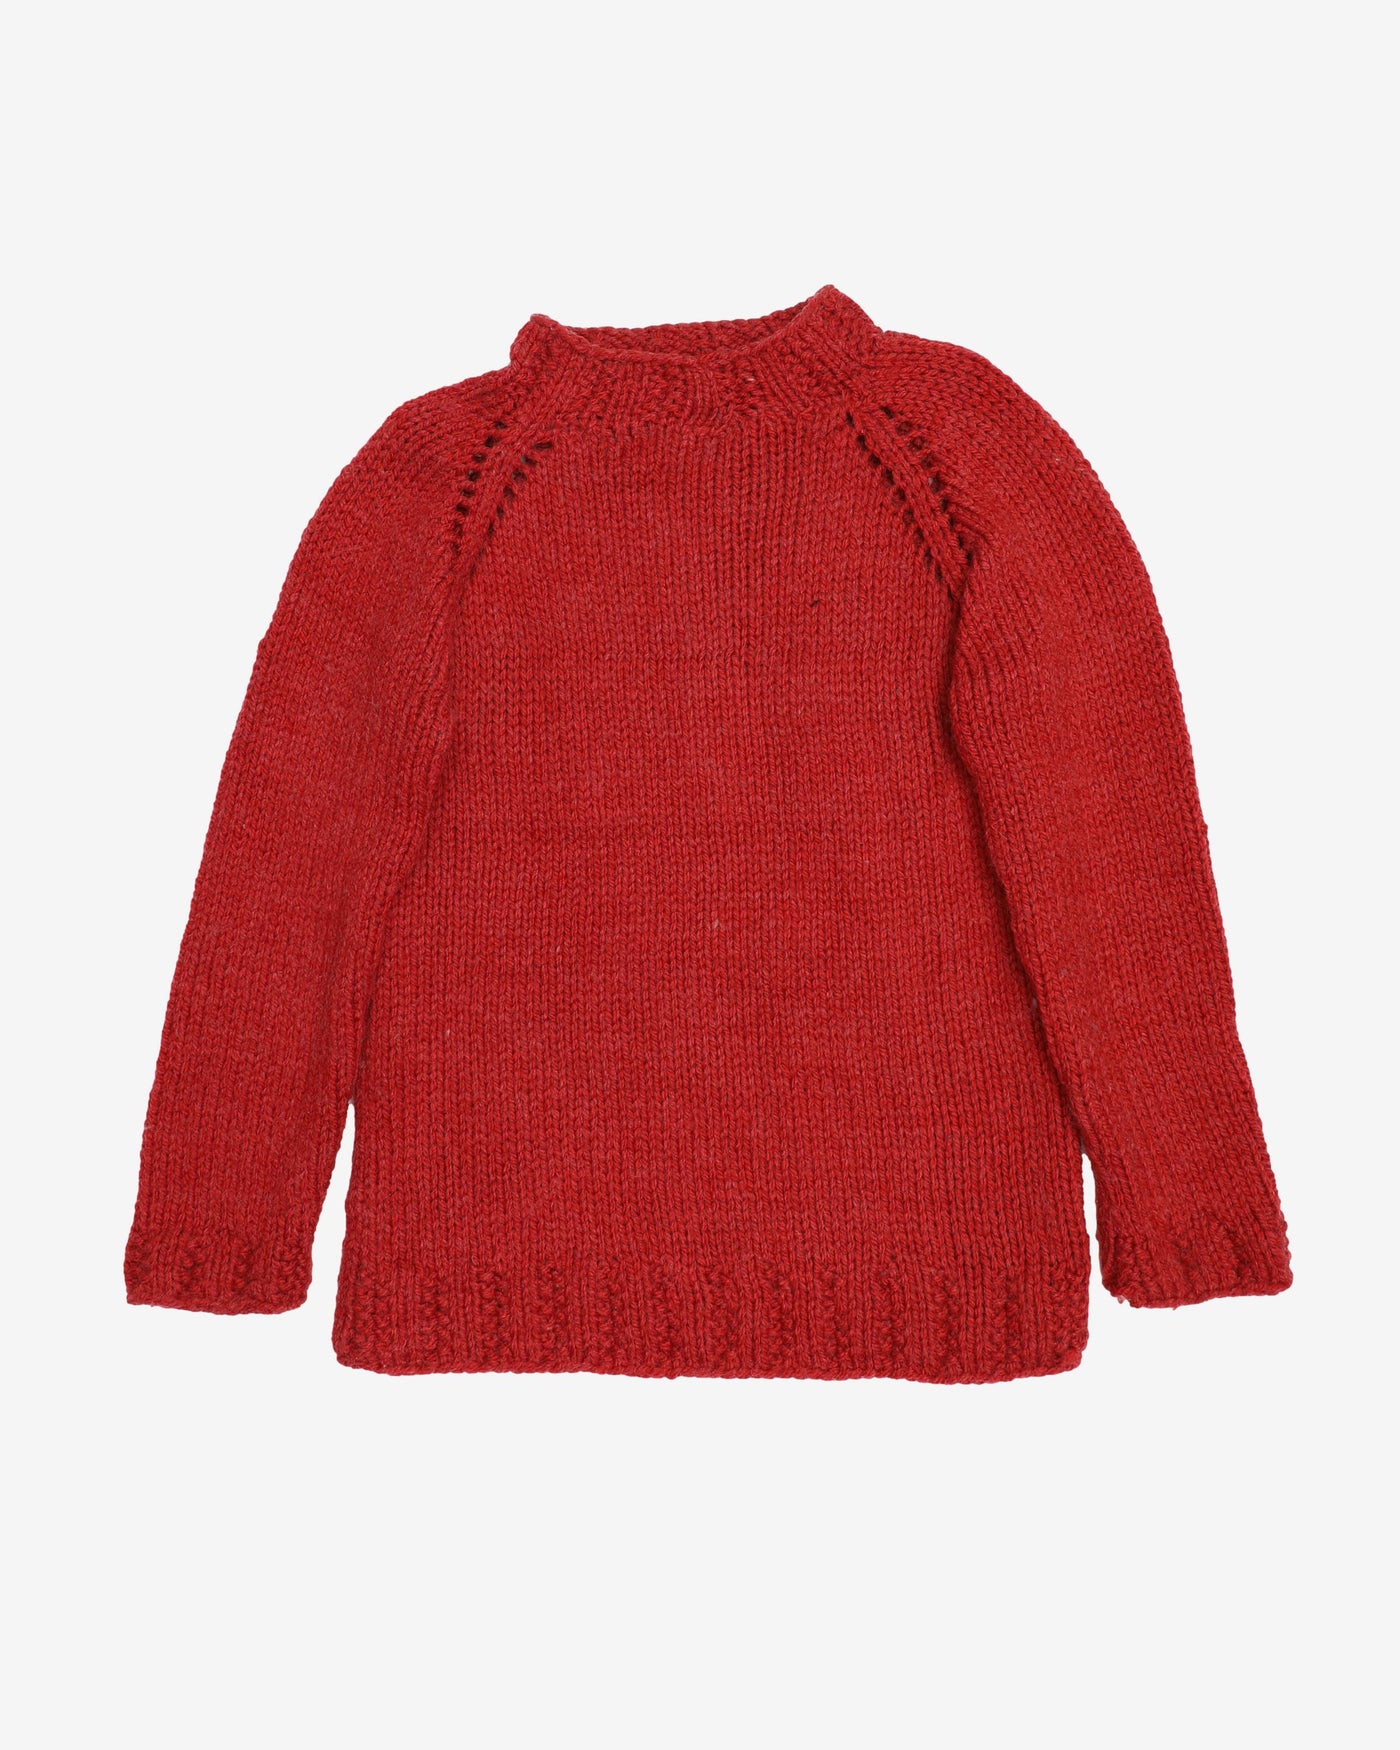 Red Chunky Hand Knitted Jumper - S